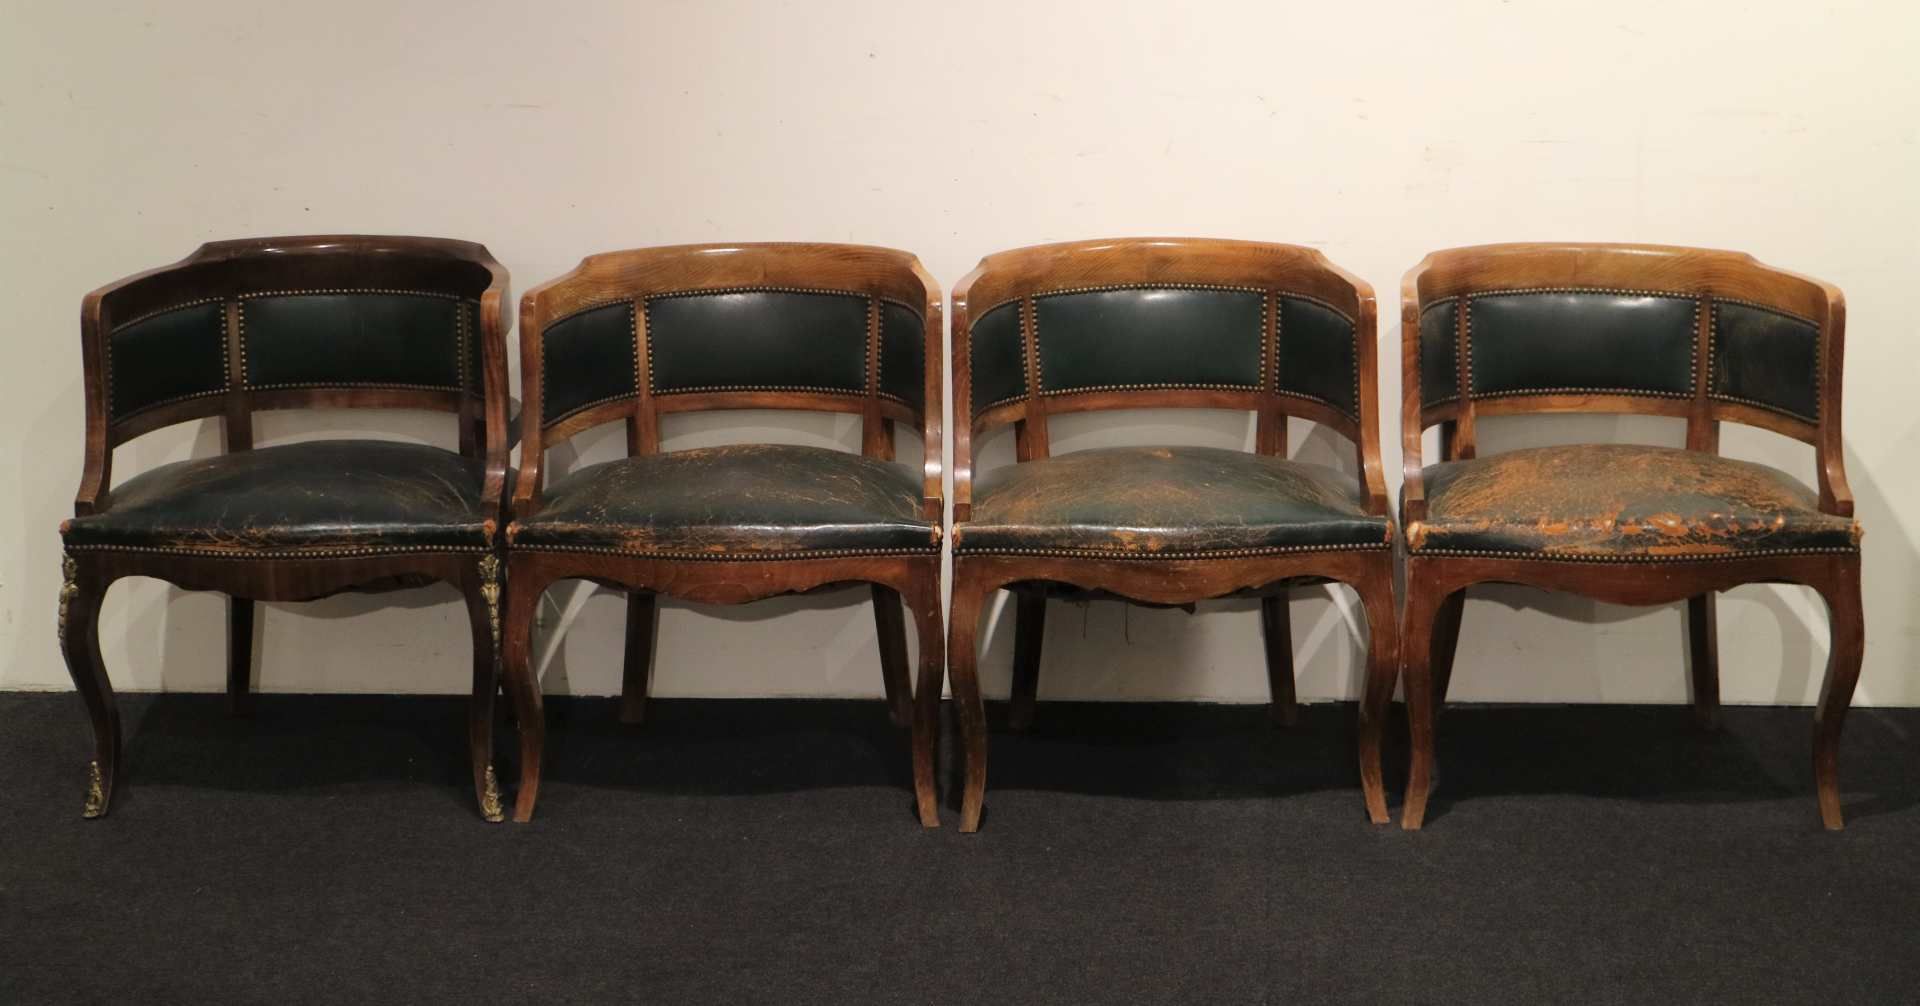 Lot of 4 notary armchairs